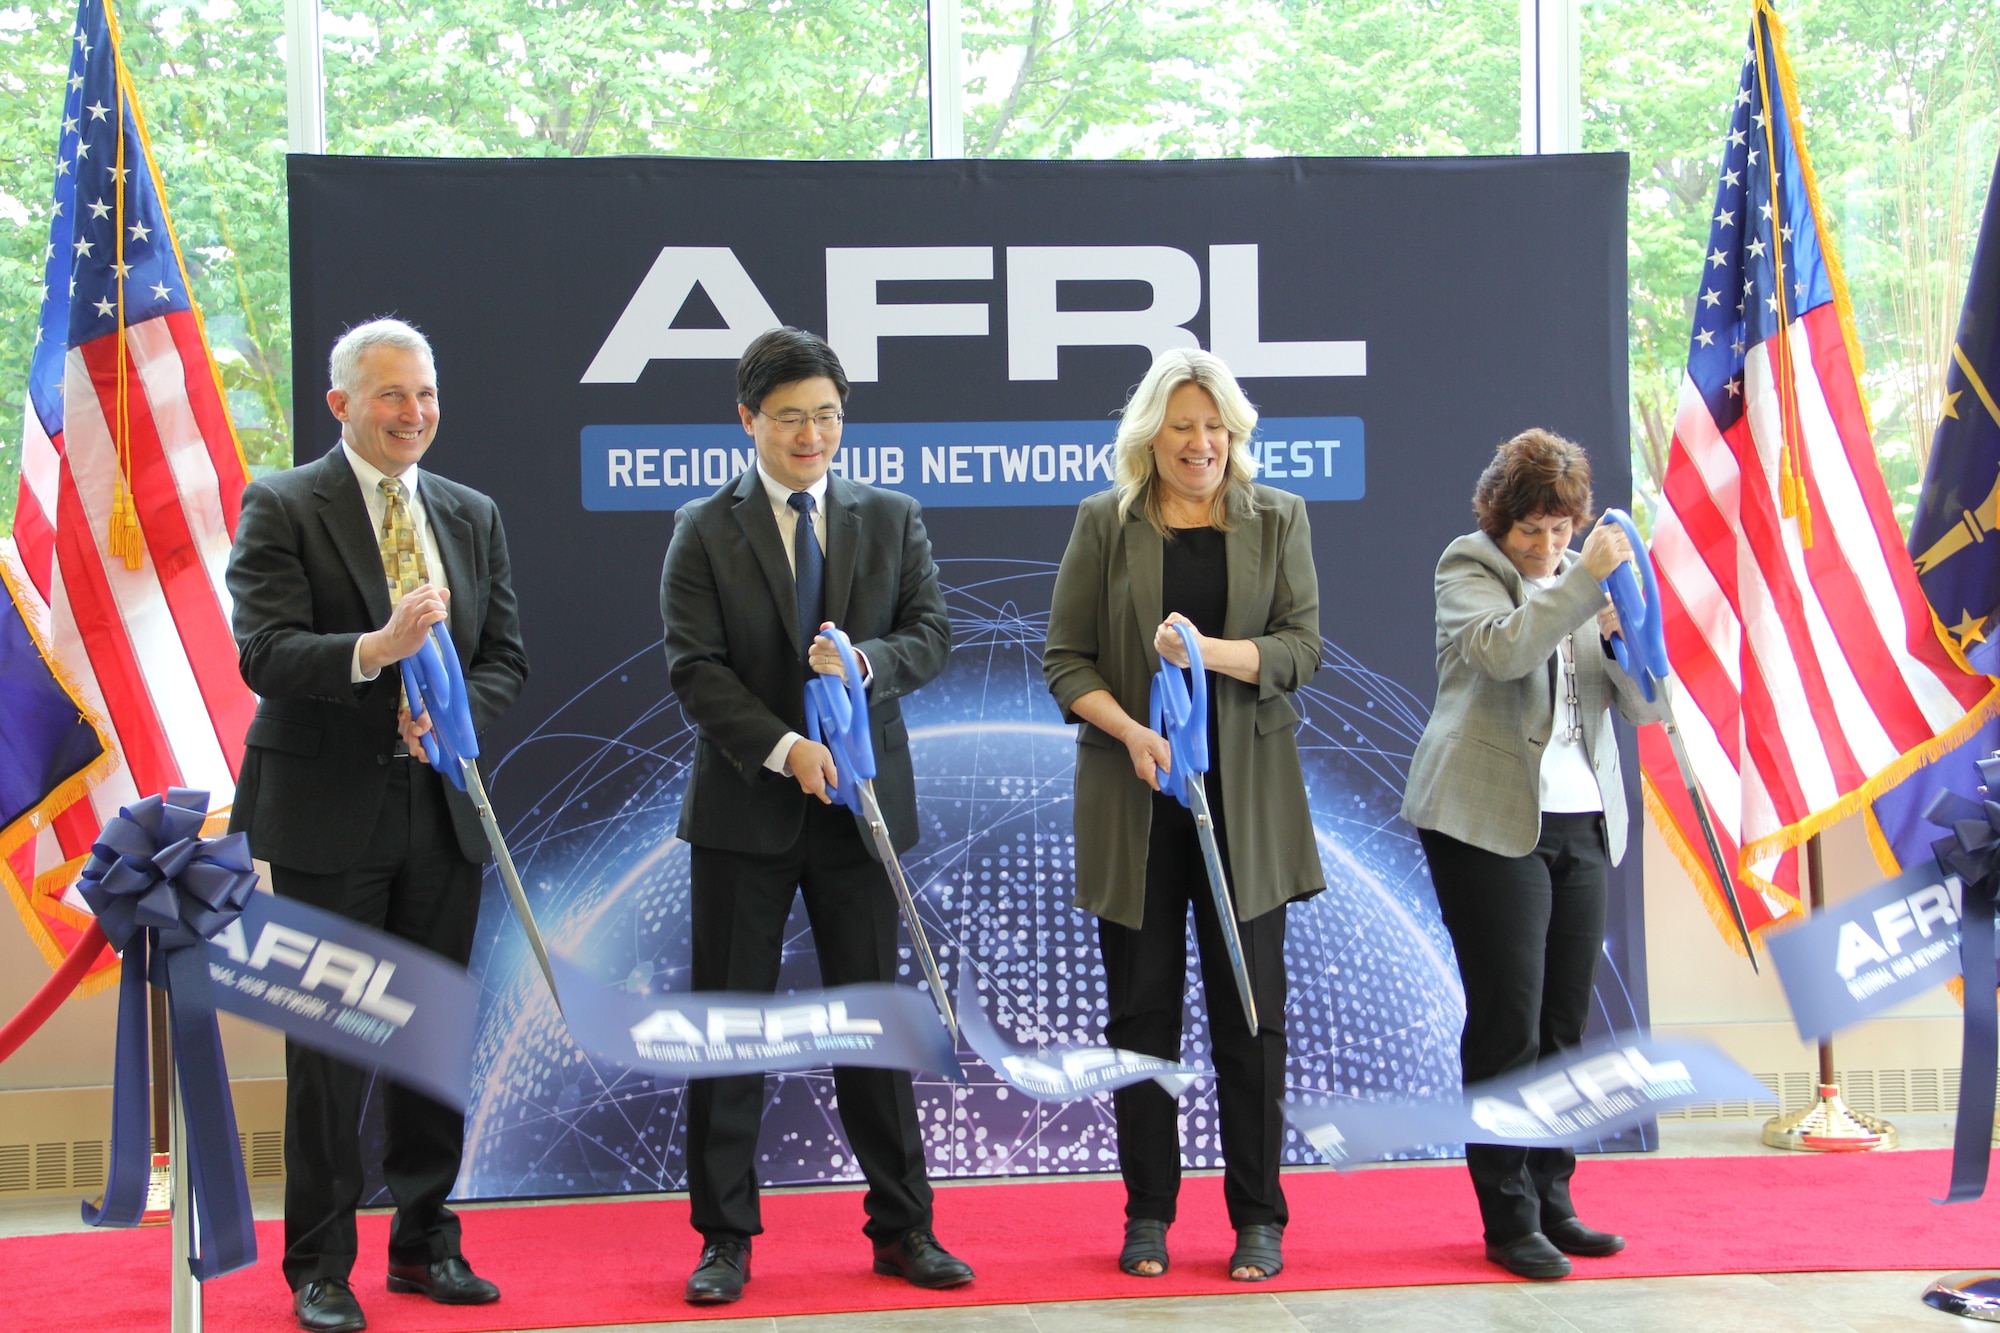 From left: Dr. Richard Vaia, chief scientist, Materials and Manufacturing Directorate at Air Force Research Laboratory, or AFRL; Mung Chiang, president, Purdue University; Monica Poelking, deputy chief technology officer at AFRL; and Dr. Karen Plaut, principal investigator, AFRL Regional Network Hub-Midwest, cut the ribbon during an opening ceremony for the partnership between AFRL and Purdue University to kick off the Regional Hub Network - Midwest April 21, 2023, at Purdue University in West Lafayette, Indiana. (U.S. Air Force photo / Aleah M. Castrejon)